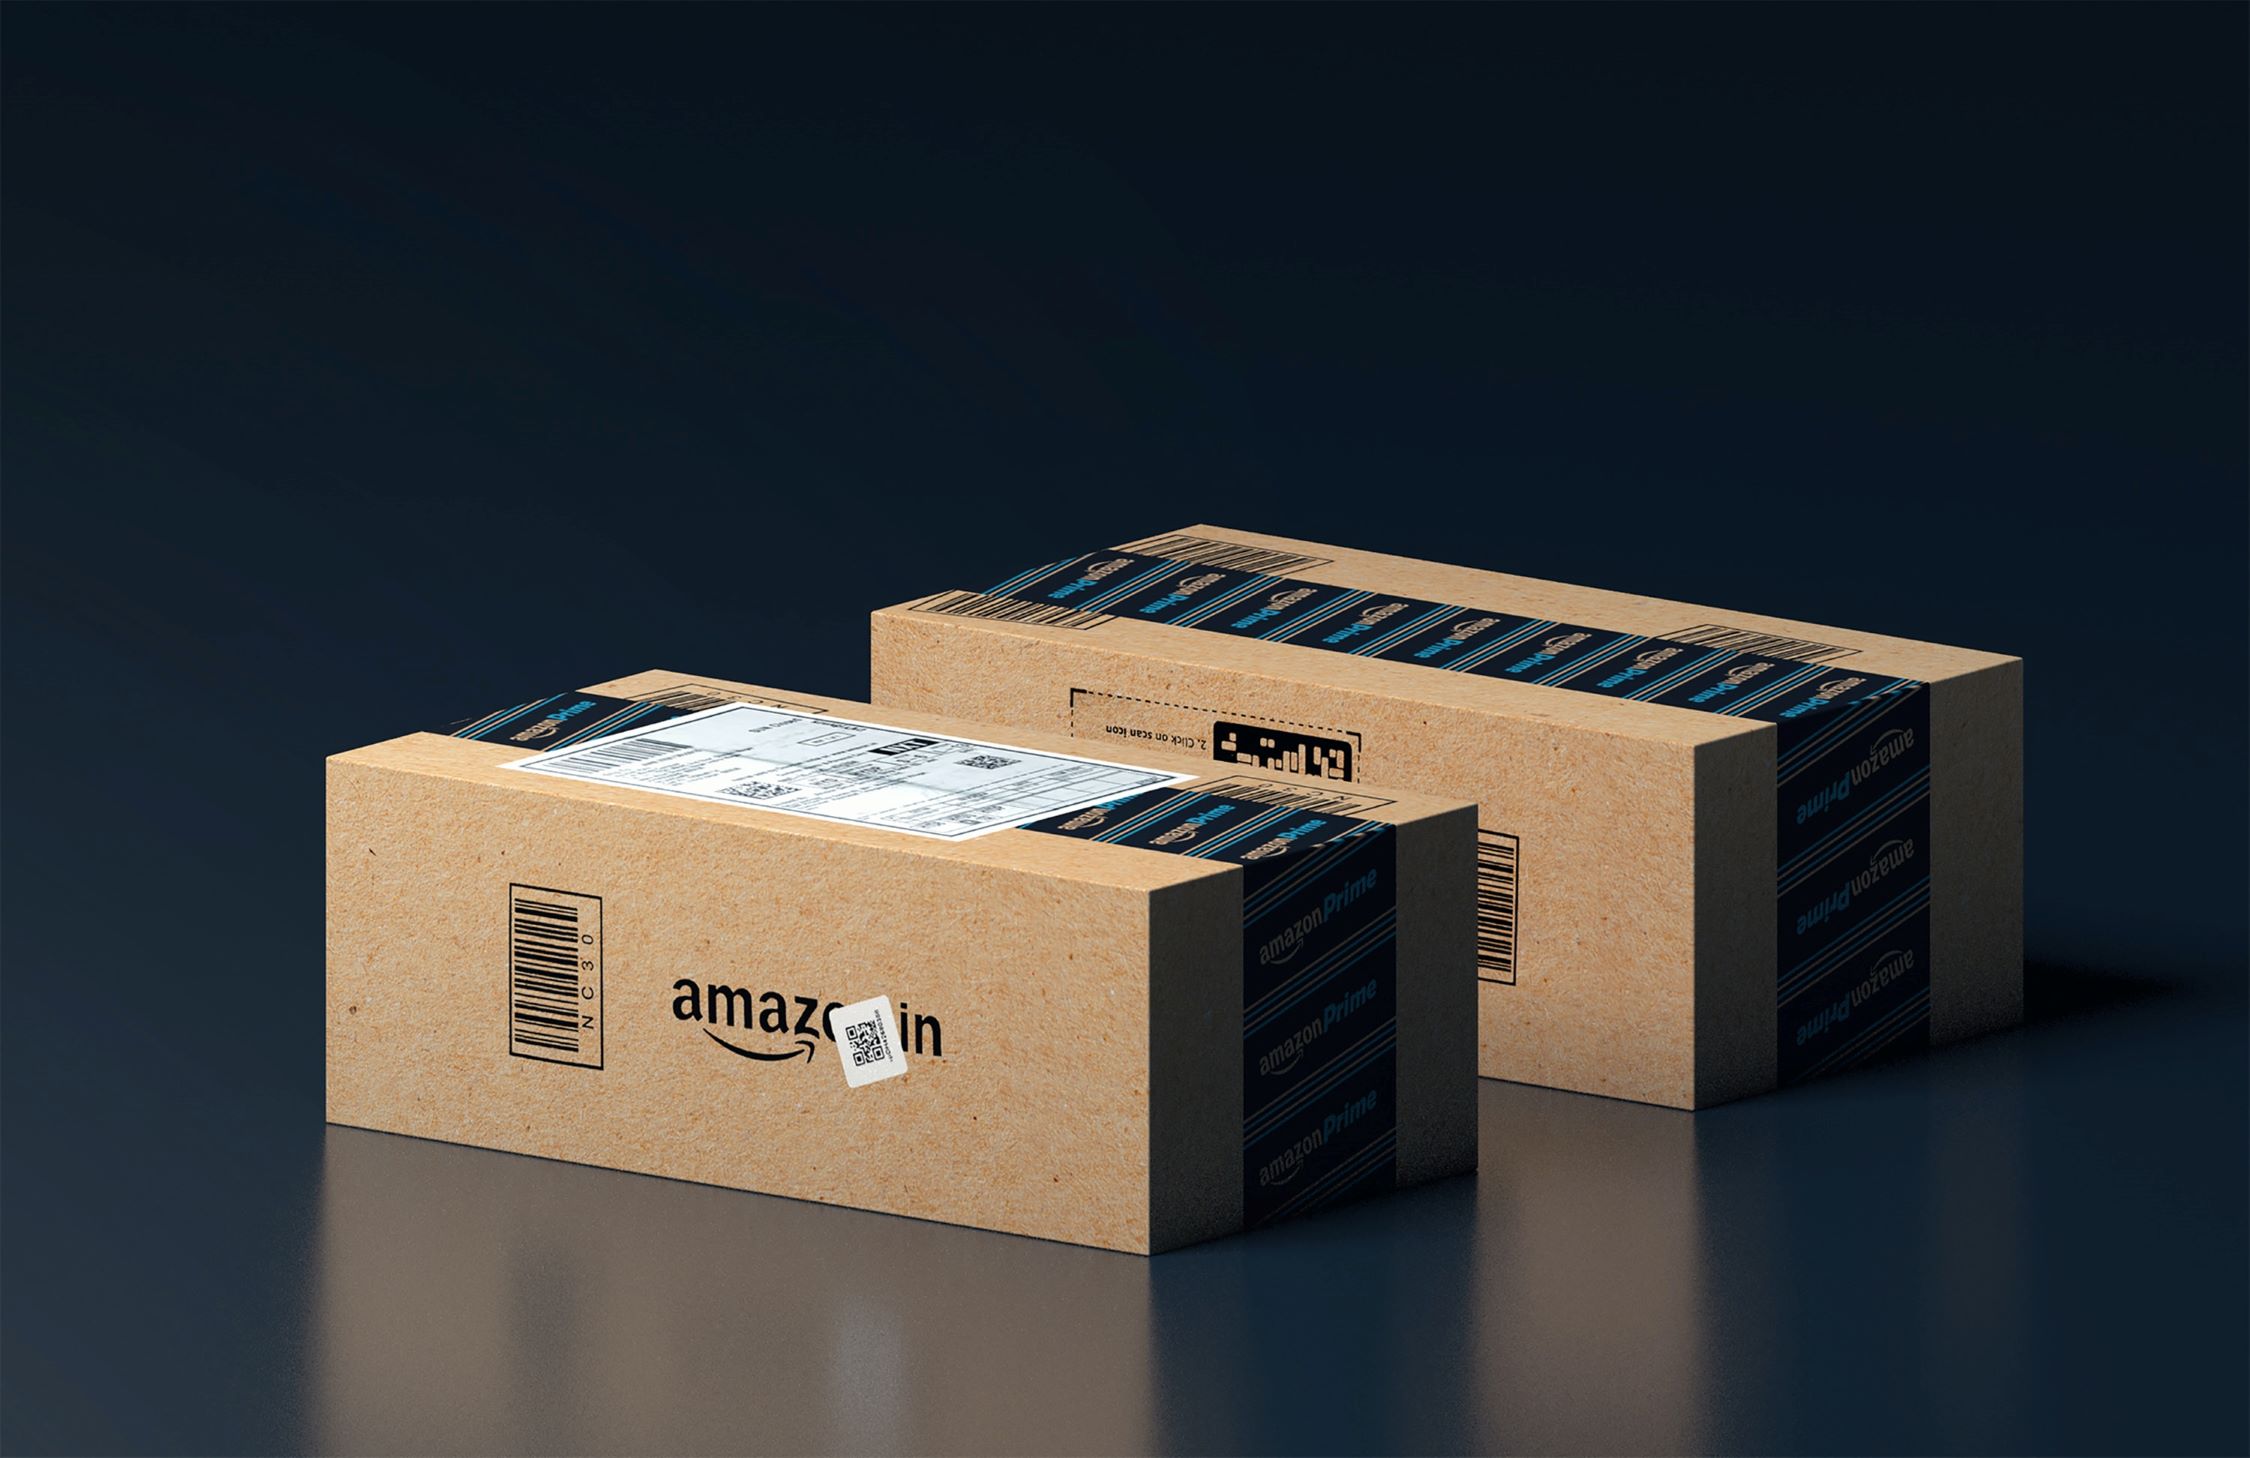 An image of Amazon delivery boxes.